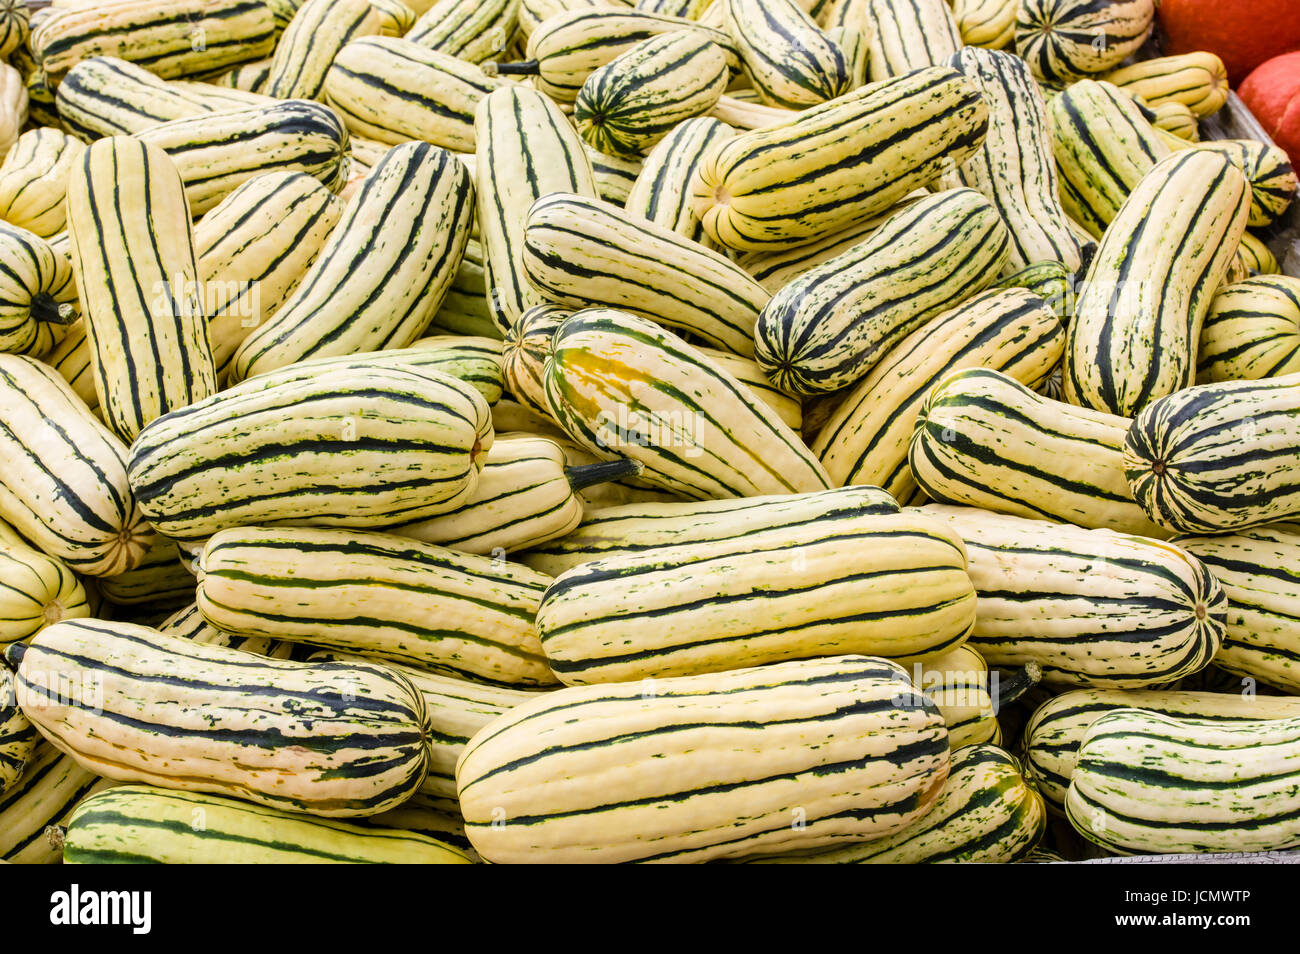 Delicate squash on display at the farmers market Stock Photo